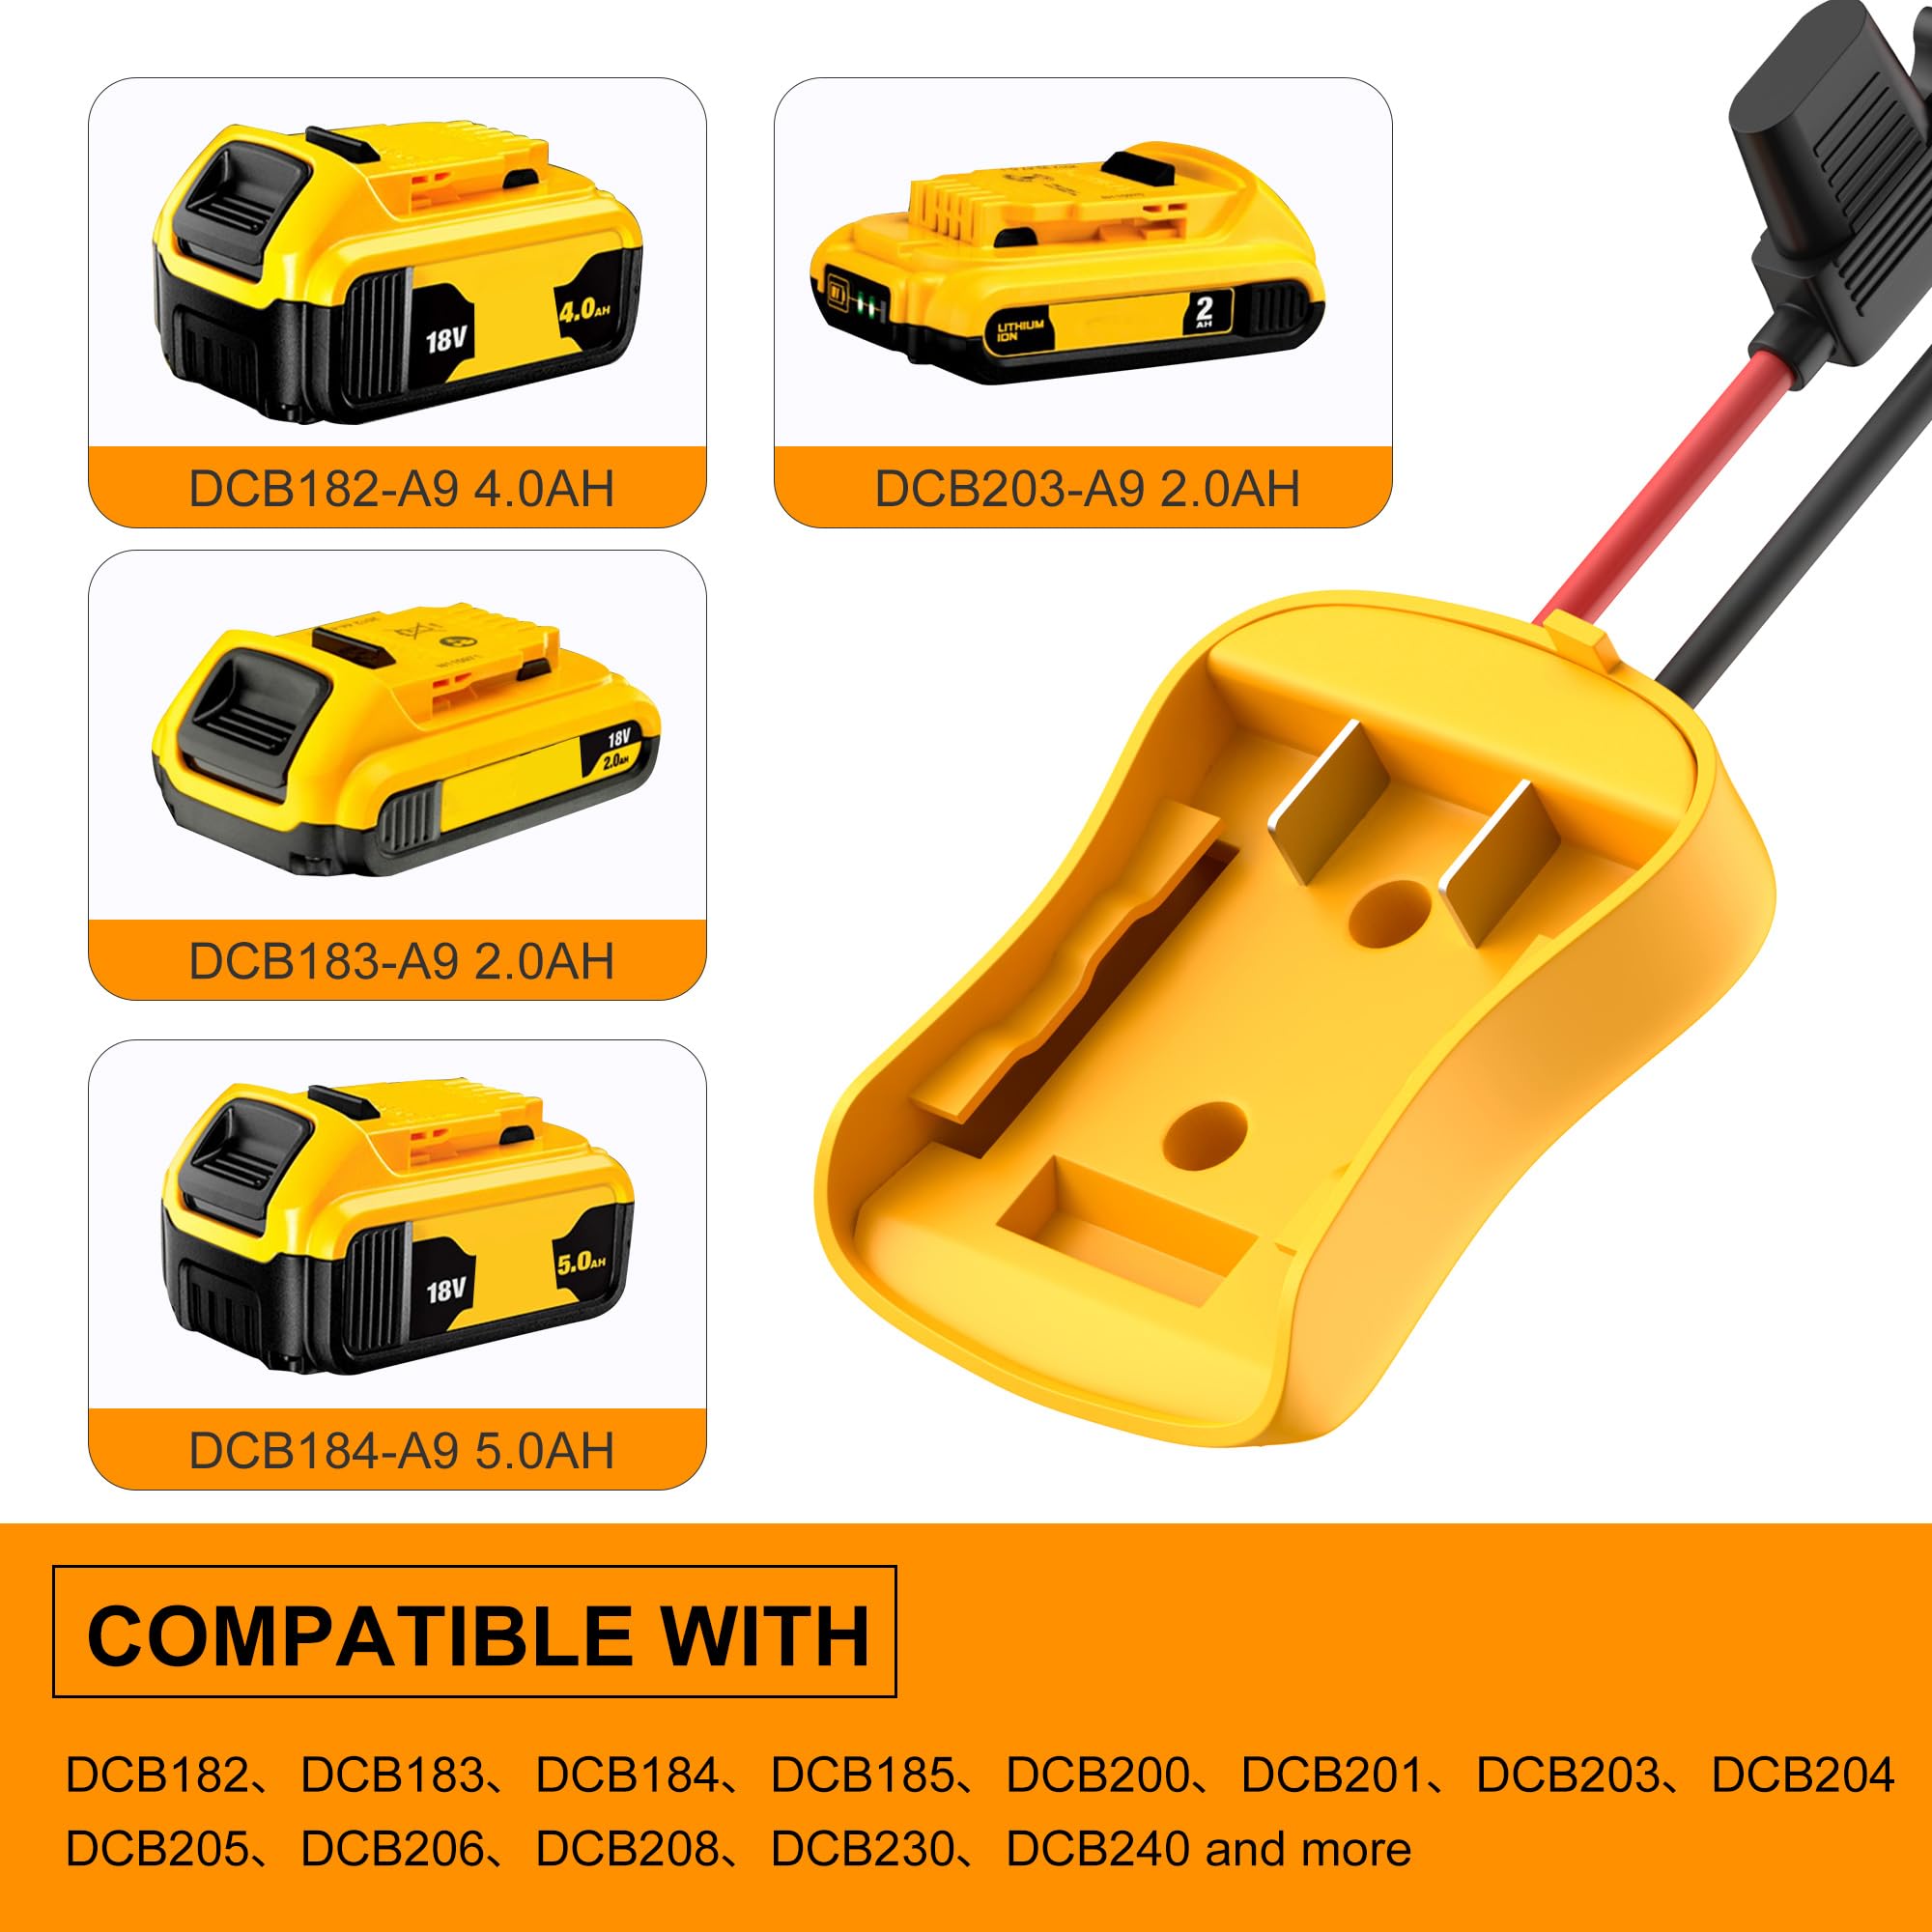 RVBOATPAT 2PCS 20V Battery Adapter for Dewalt Power Wheel Battery Adapter Battery Converter Kit 12 AWG Wire with Fuses and Connectors for Robotic RC Car Toy